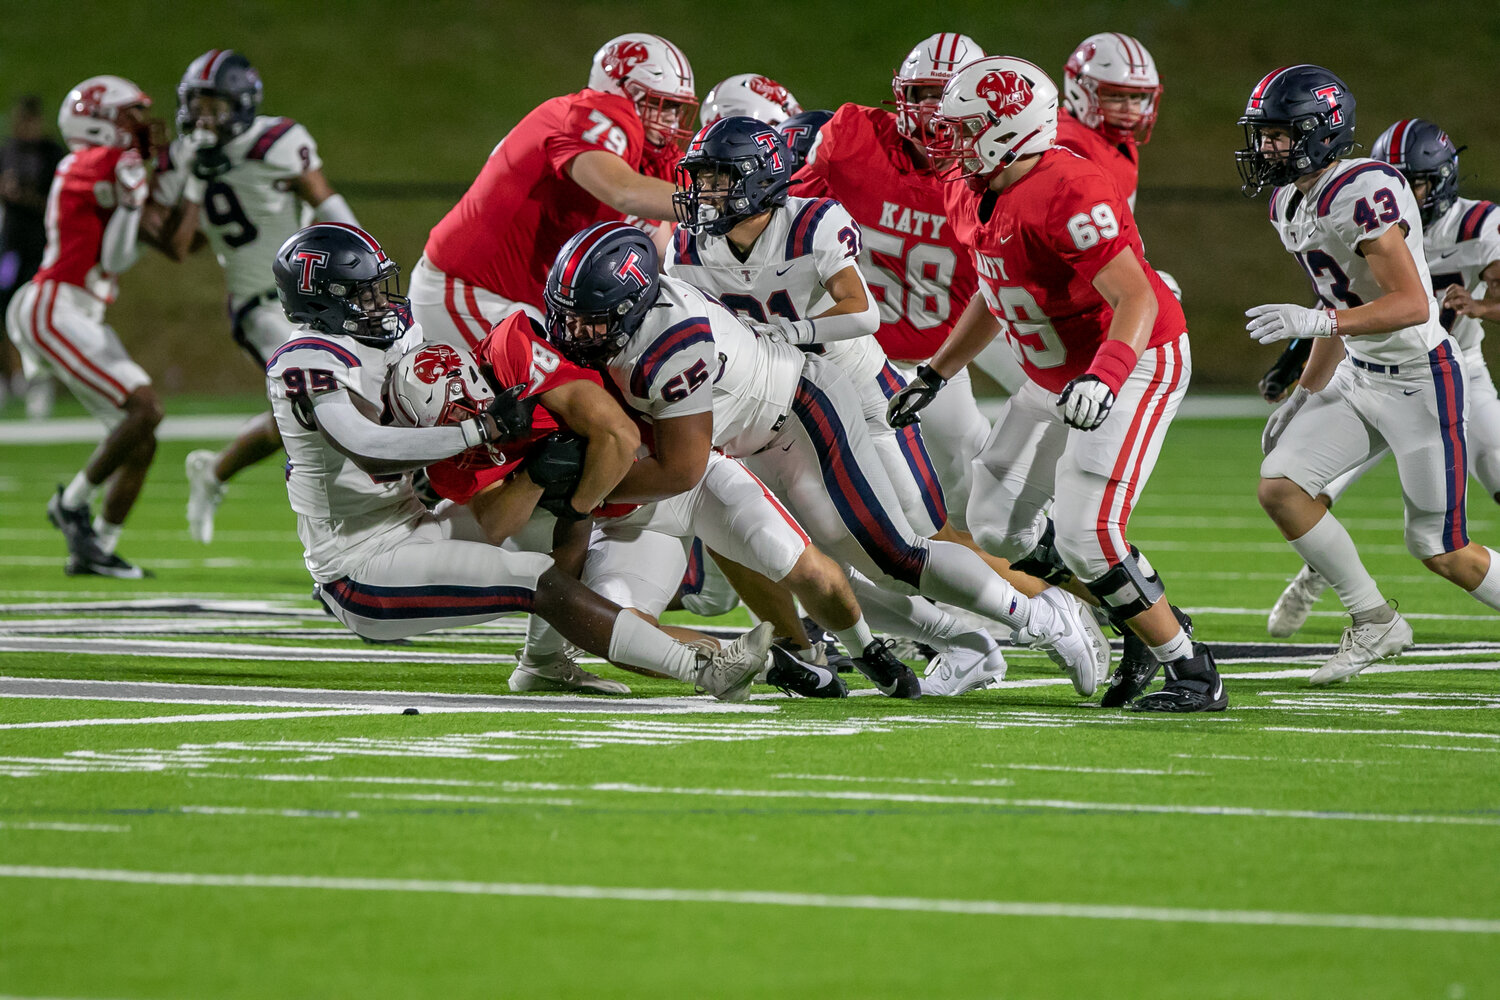 Tompkins defenders bring down a Katy player during Friday's game between Katy and Tompkins at Rhodes Stadium.